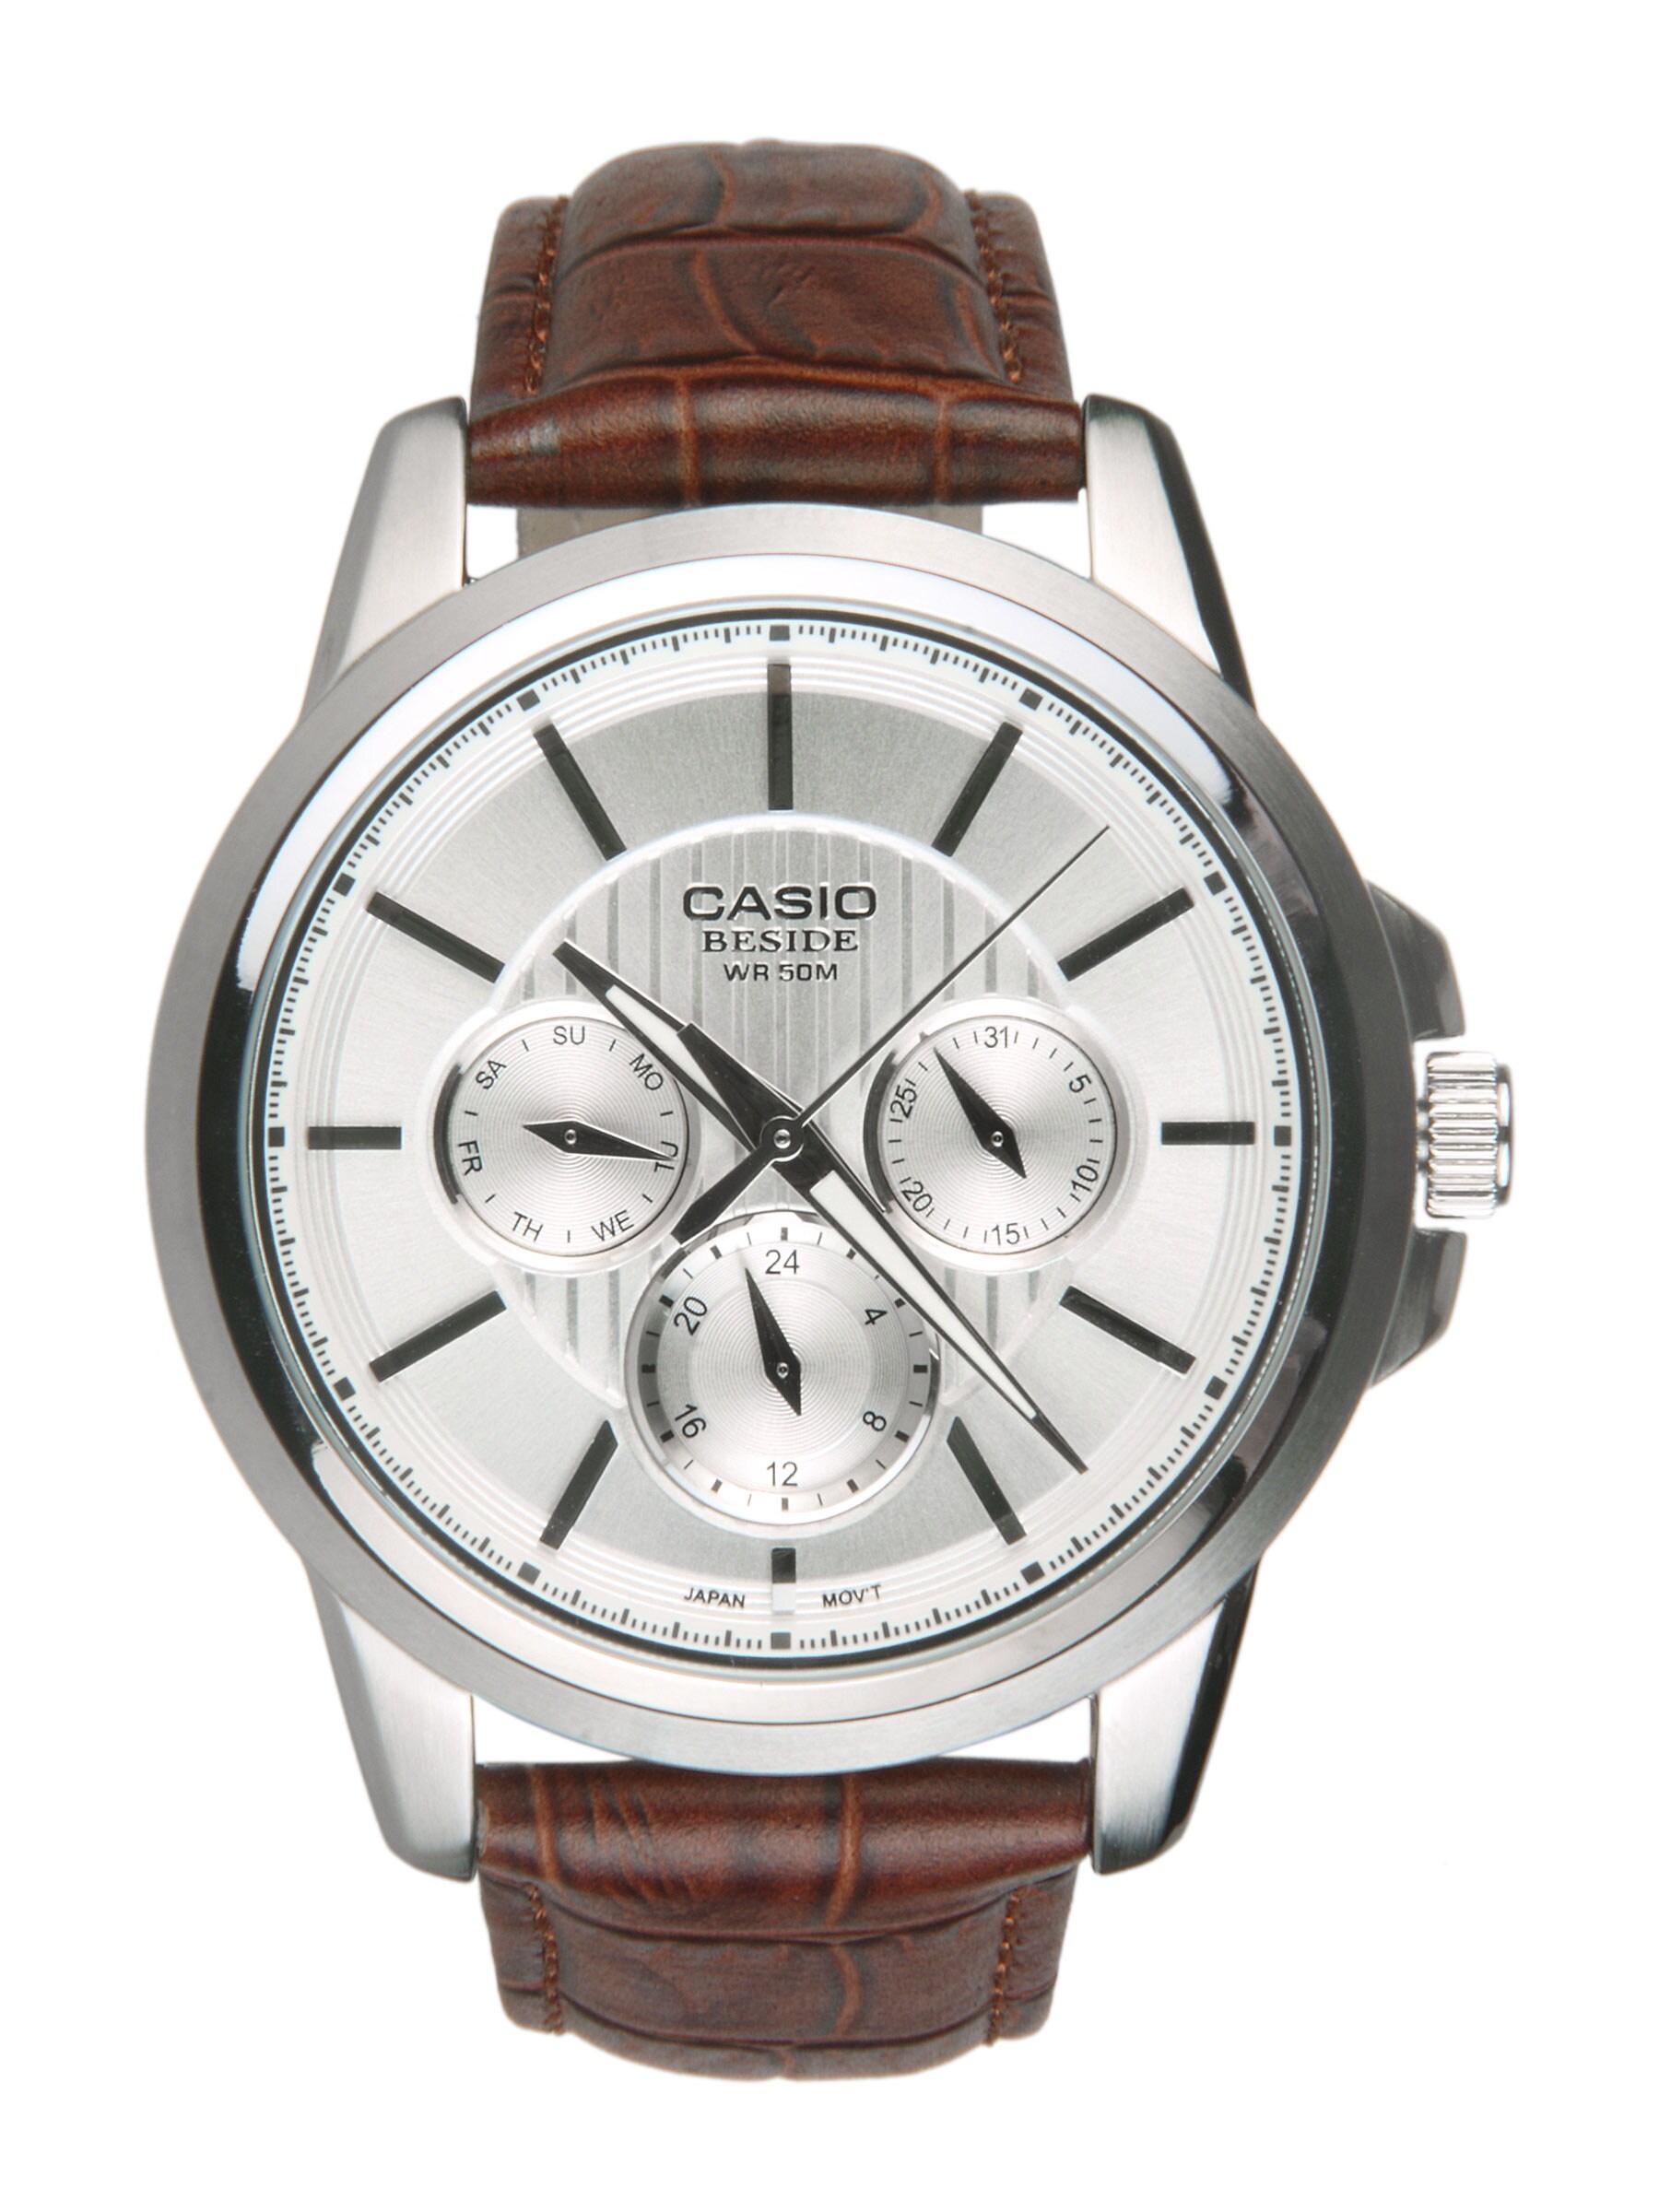 CASIO ENTICER Men Steel-Toned Analogue Watch BS121